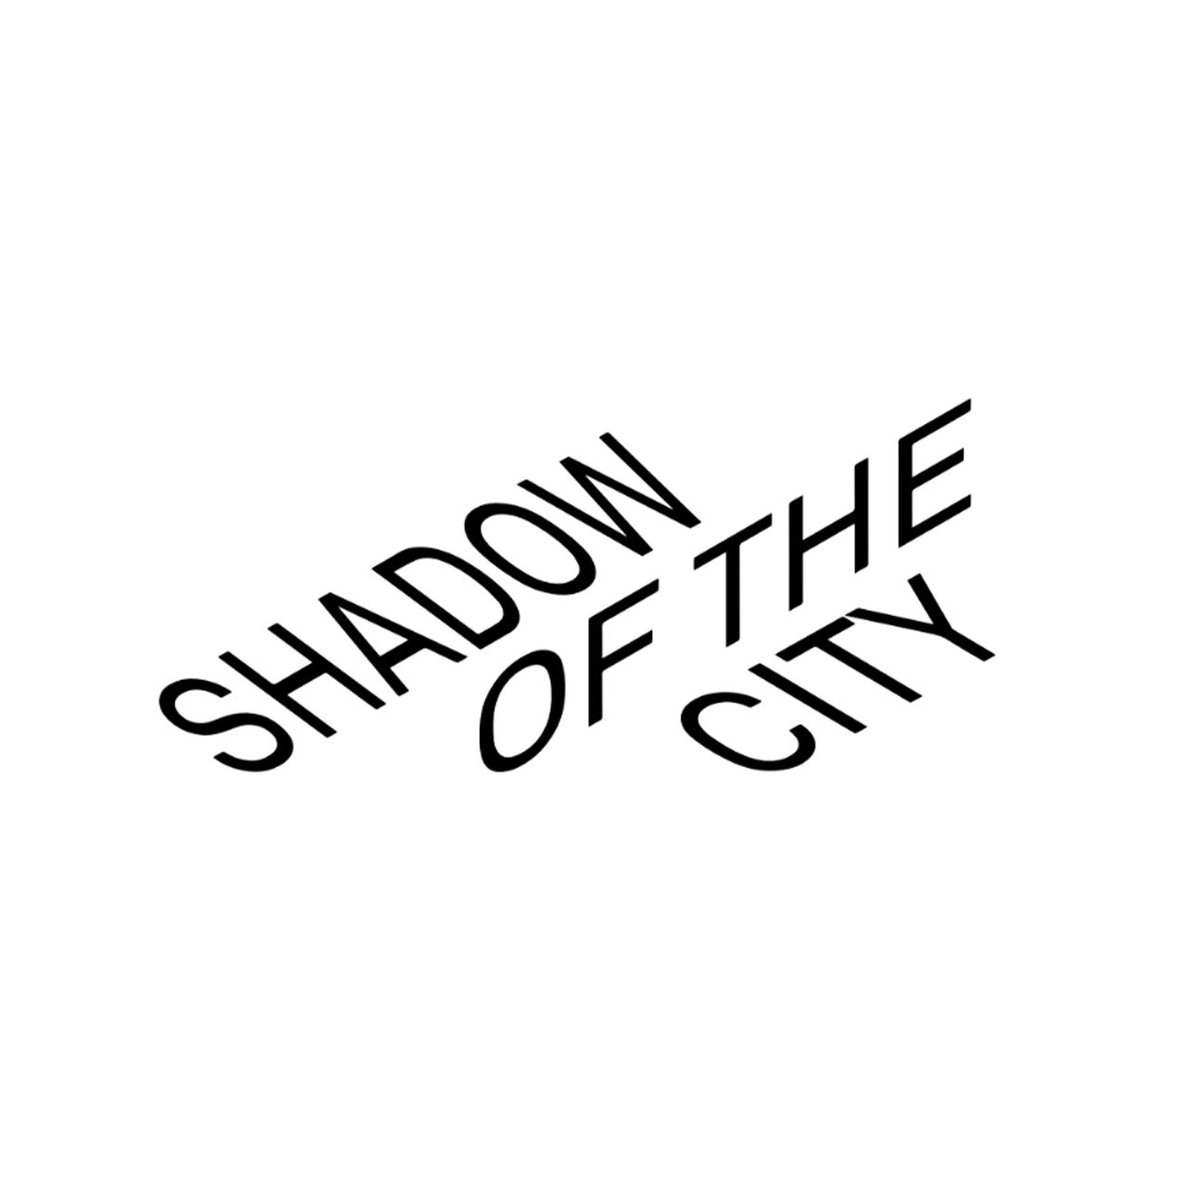 i’ve started a record label it’s called shadow of the city